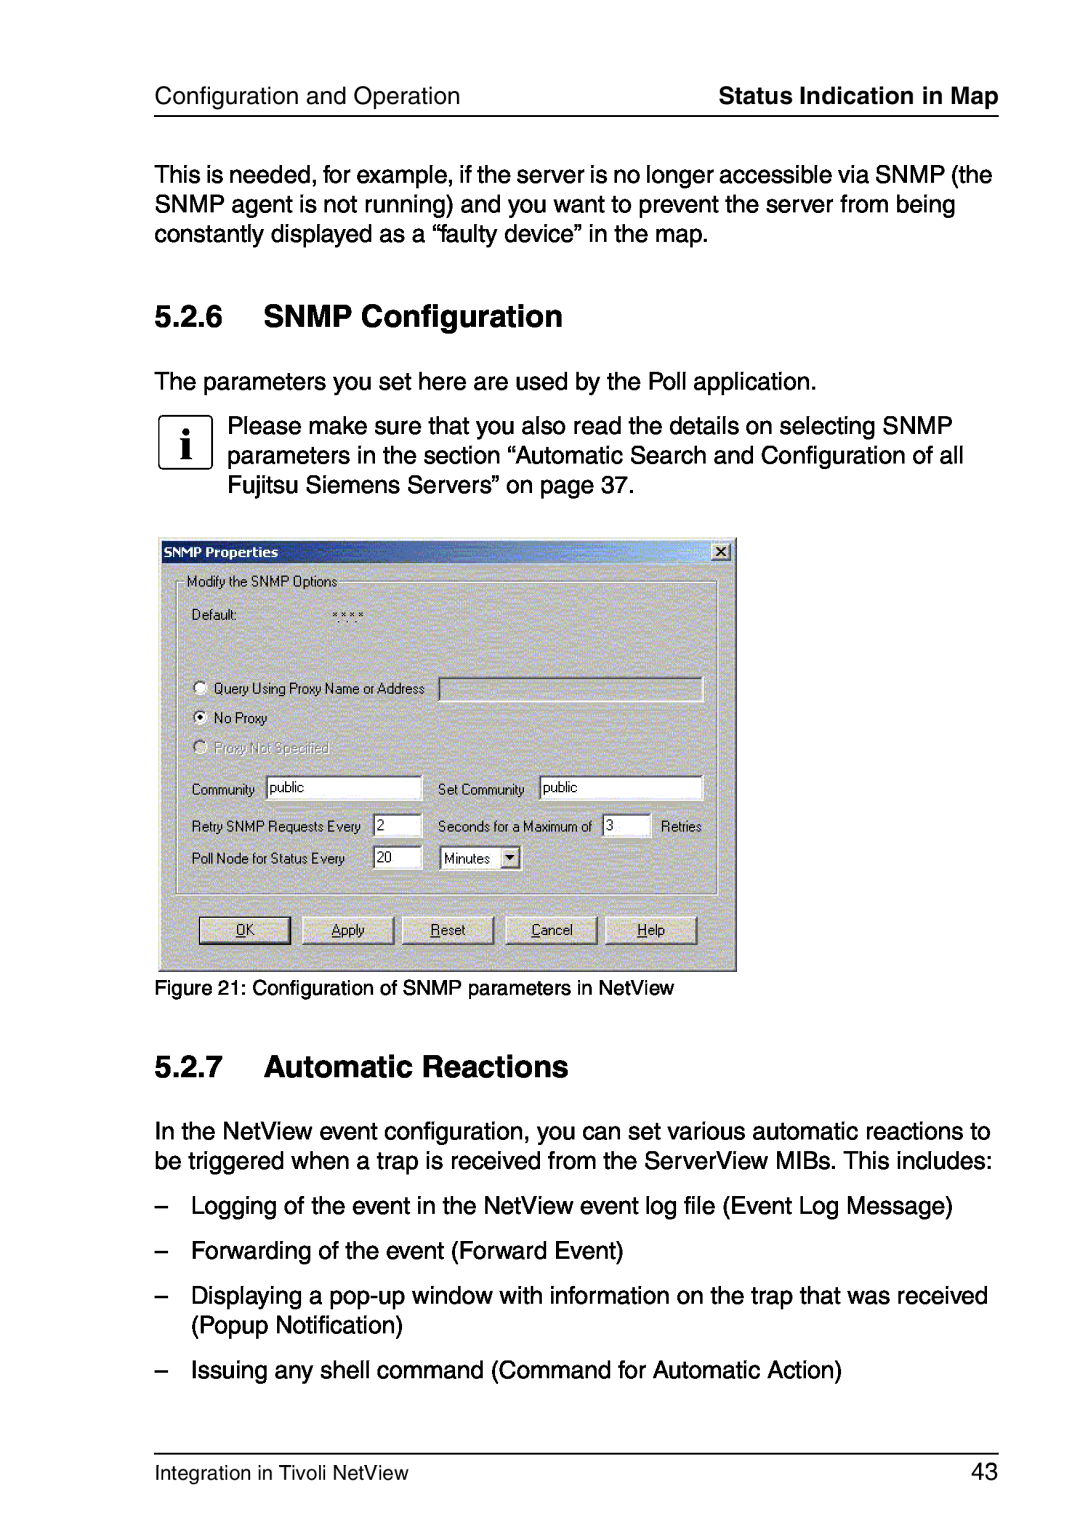 3D Connexion TivoII manual 5.2.6SNMP Configuration, 5.2.7Automatic Reactions, Configuration and Operation 